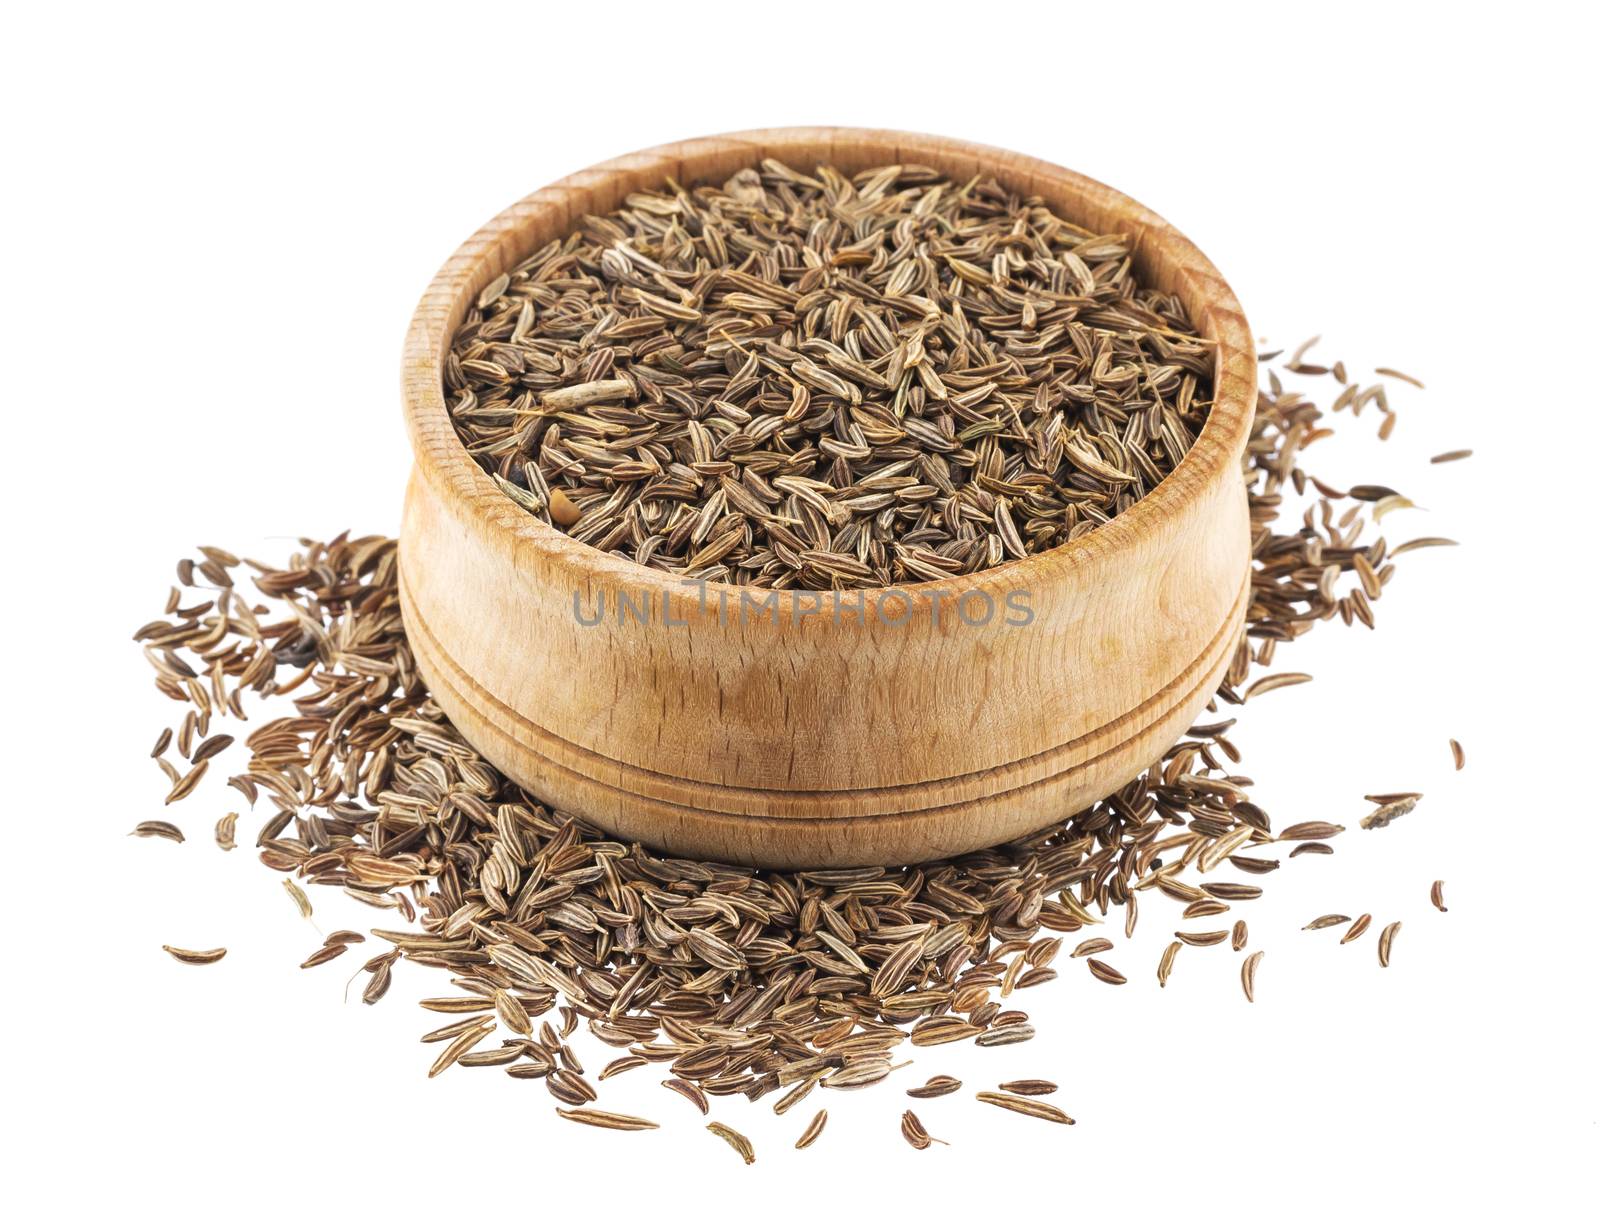 Caraway seeds in wooden bowl isolated on white background by xamtiw